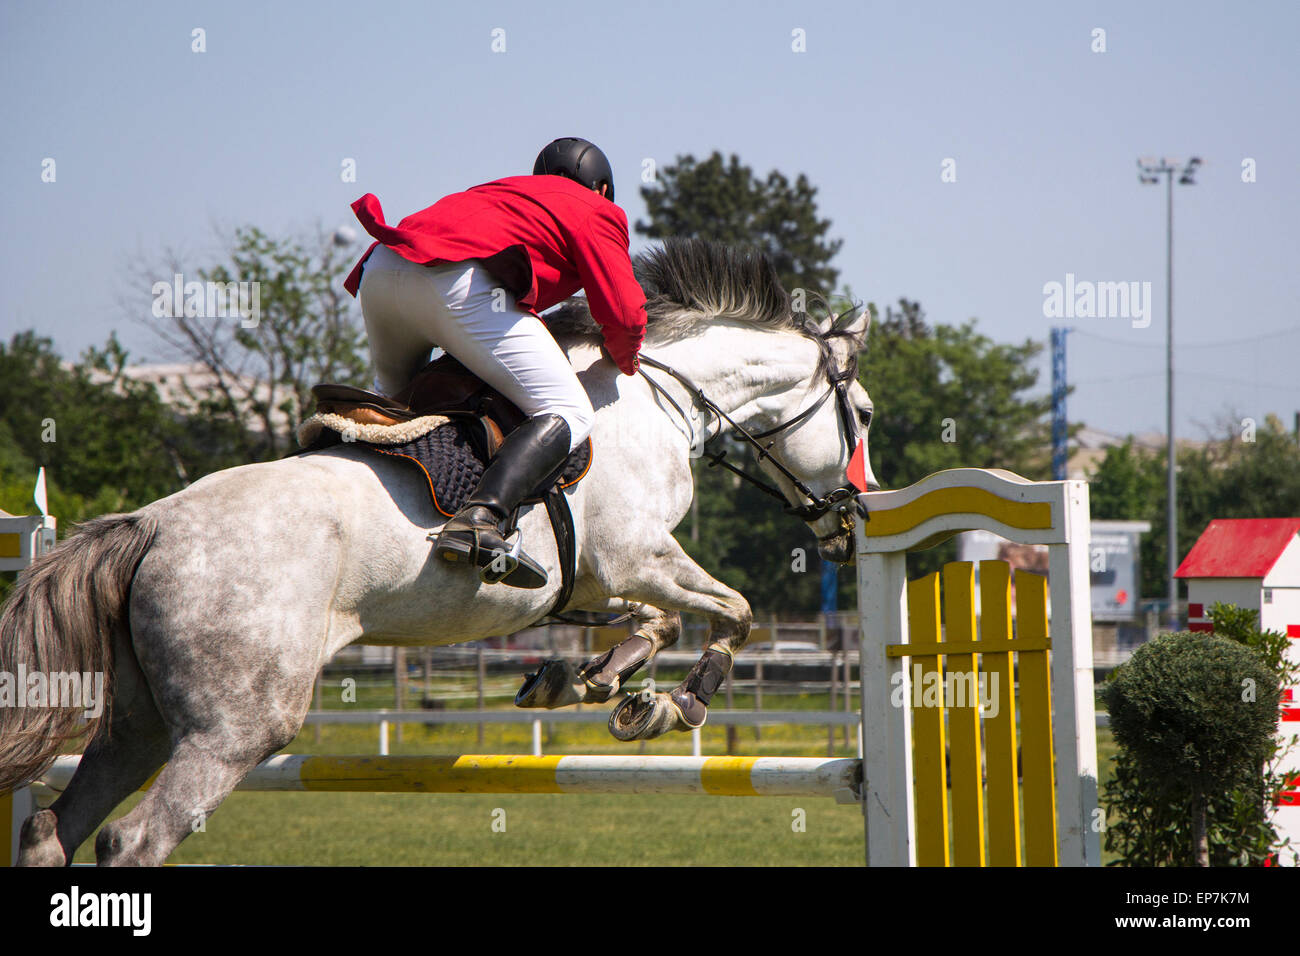 A rider on horseback competing in show jumping tournament Stock Photo